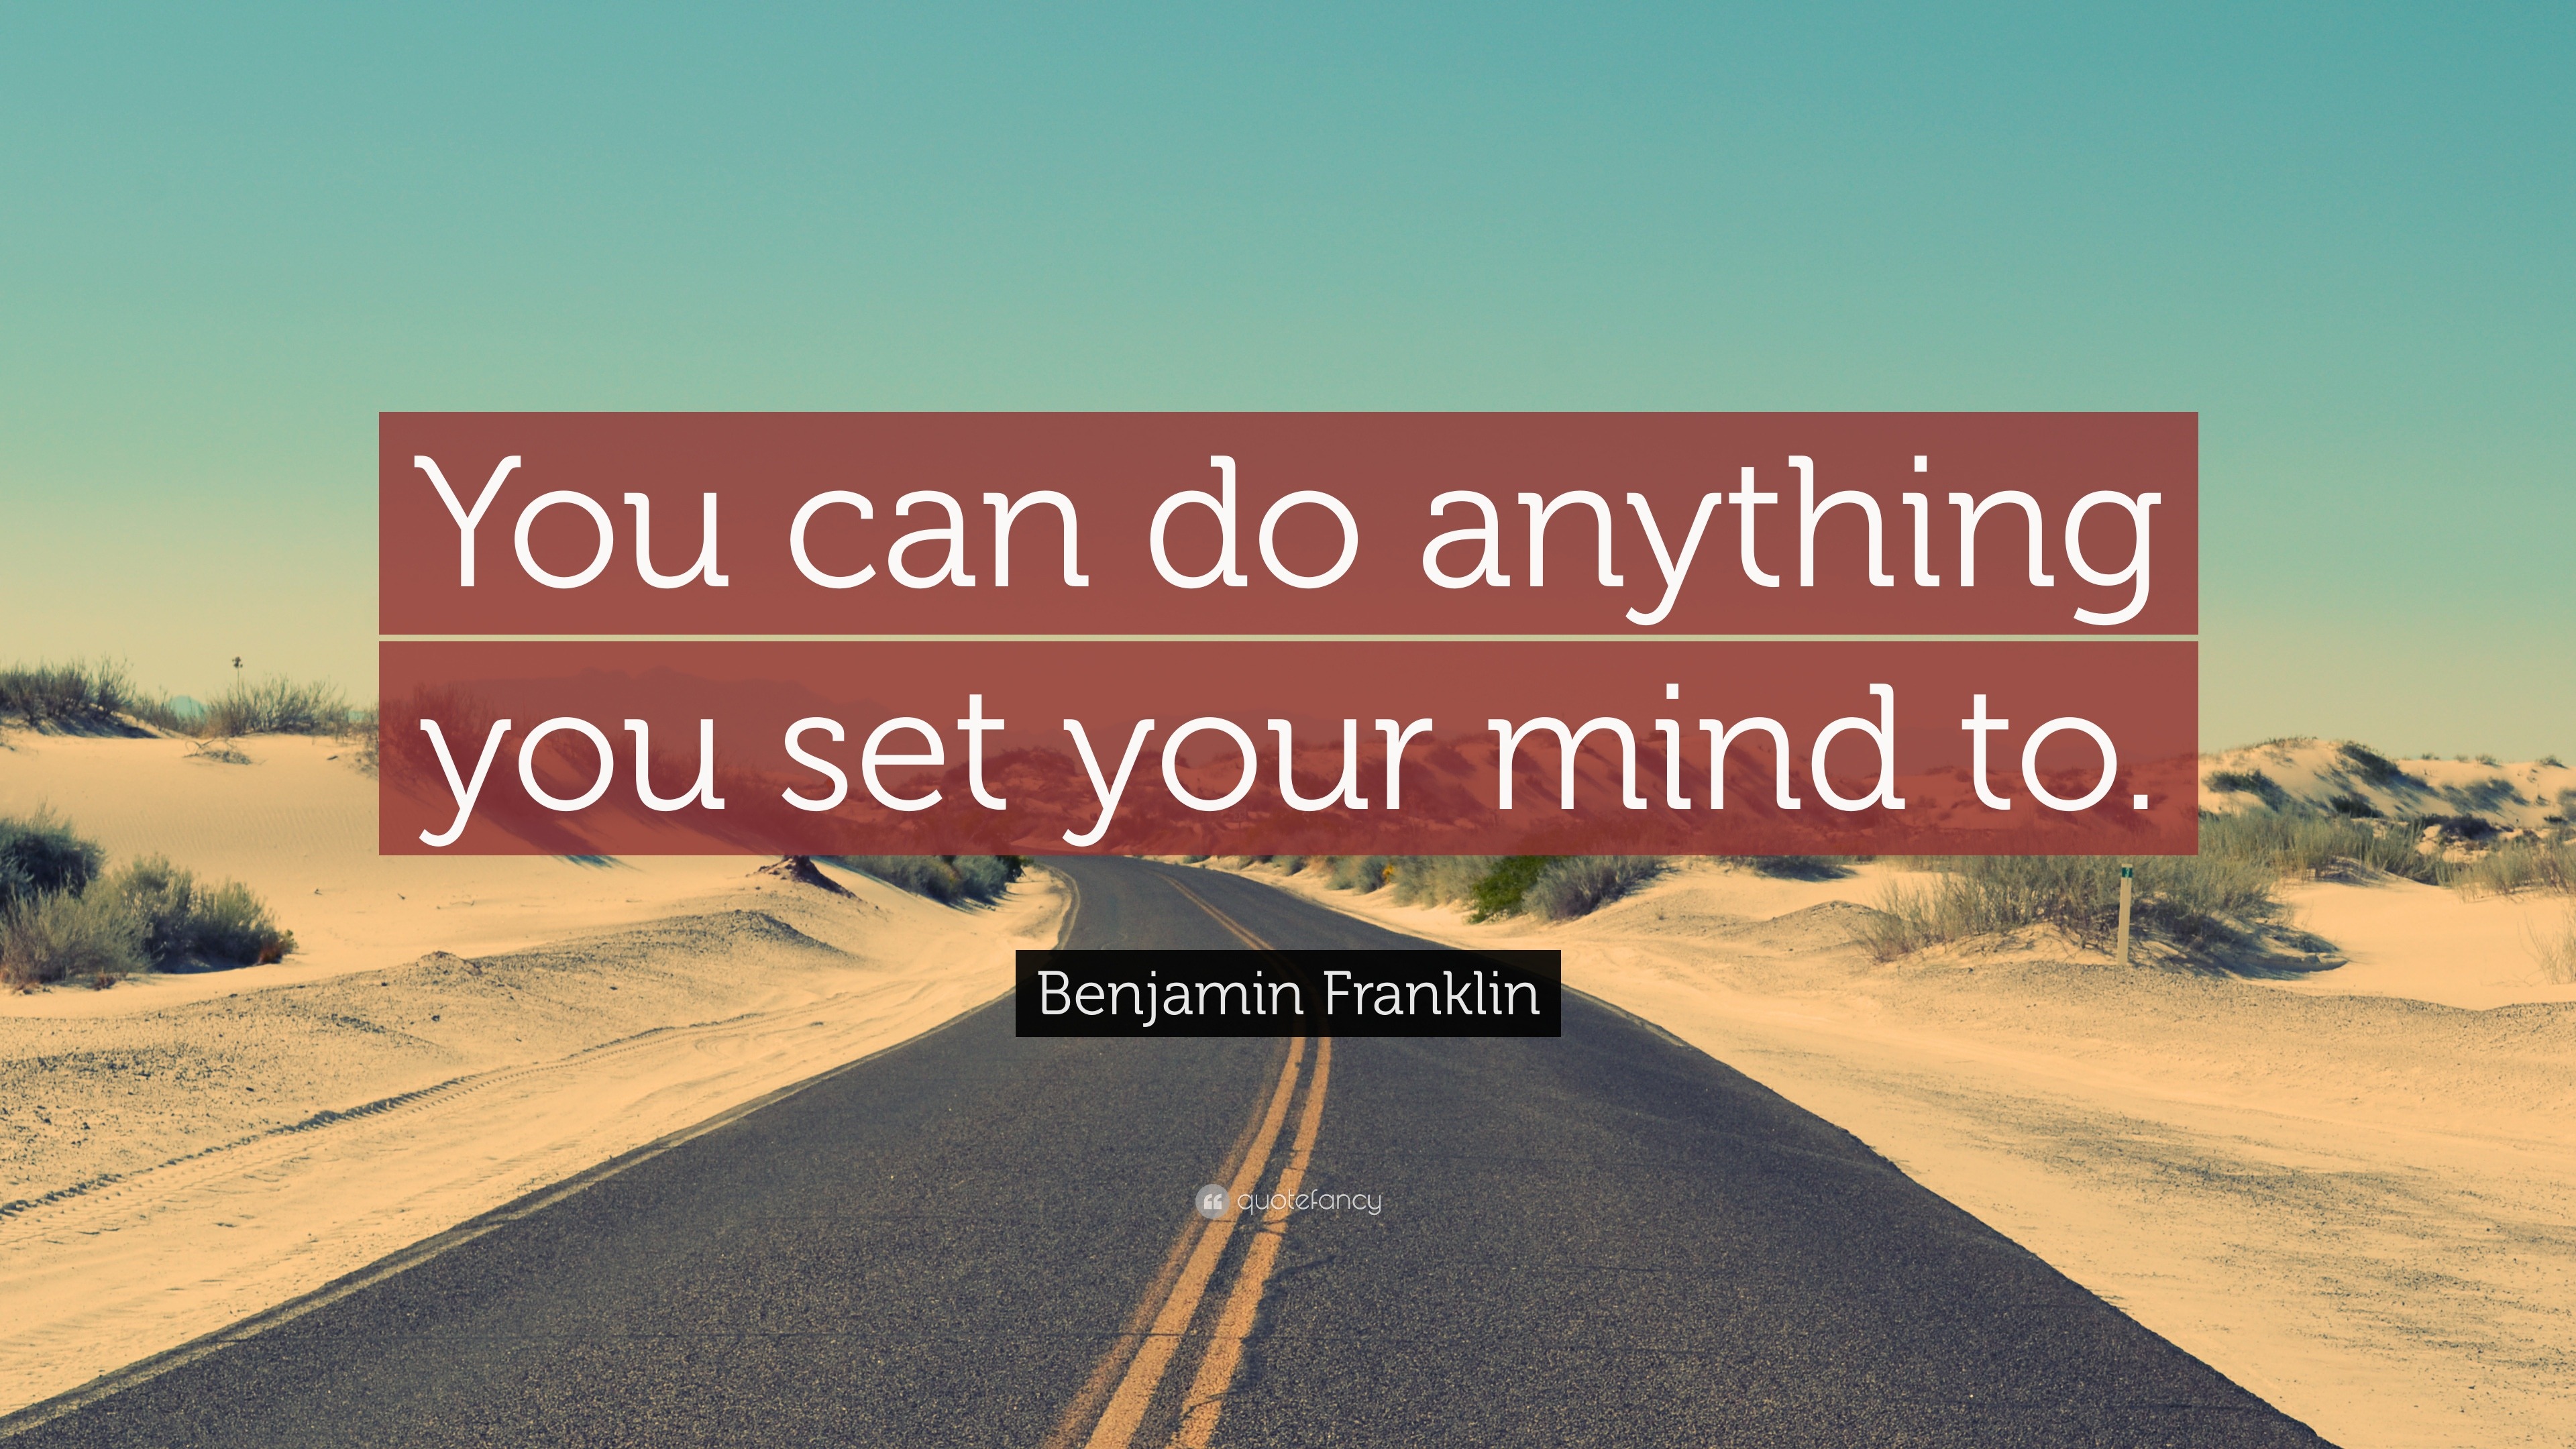 Benjamin Franklin Quote: “You can do anything you set your mind to.”